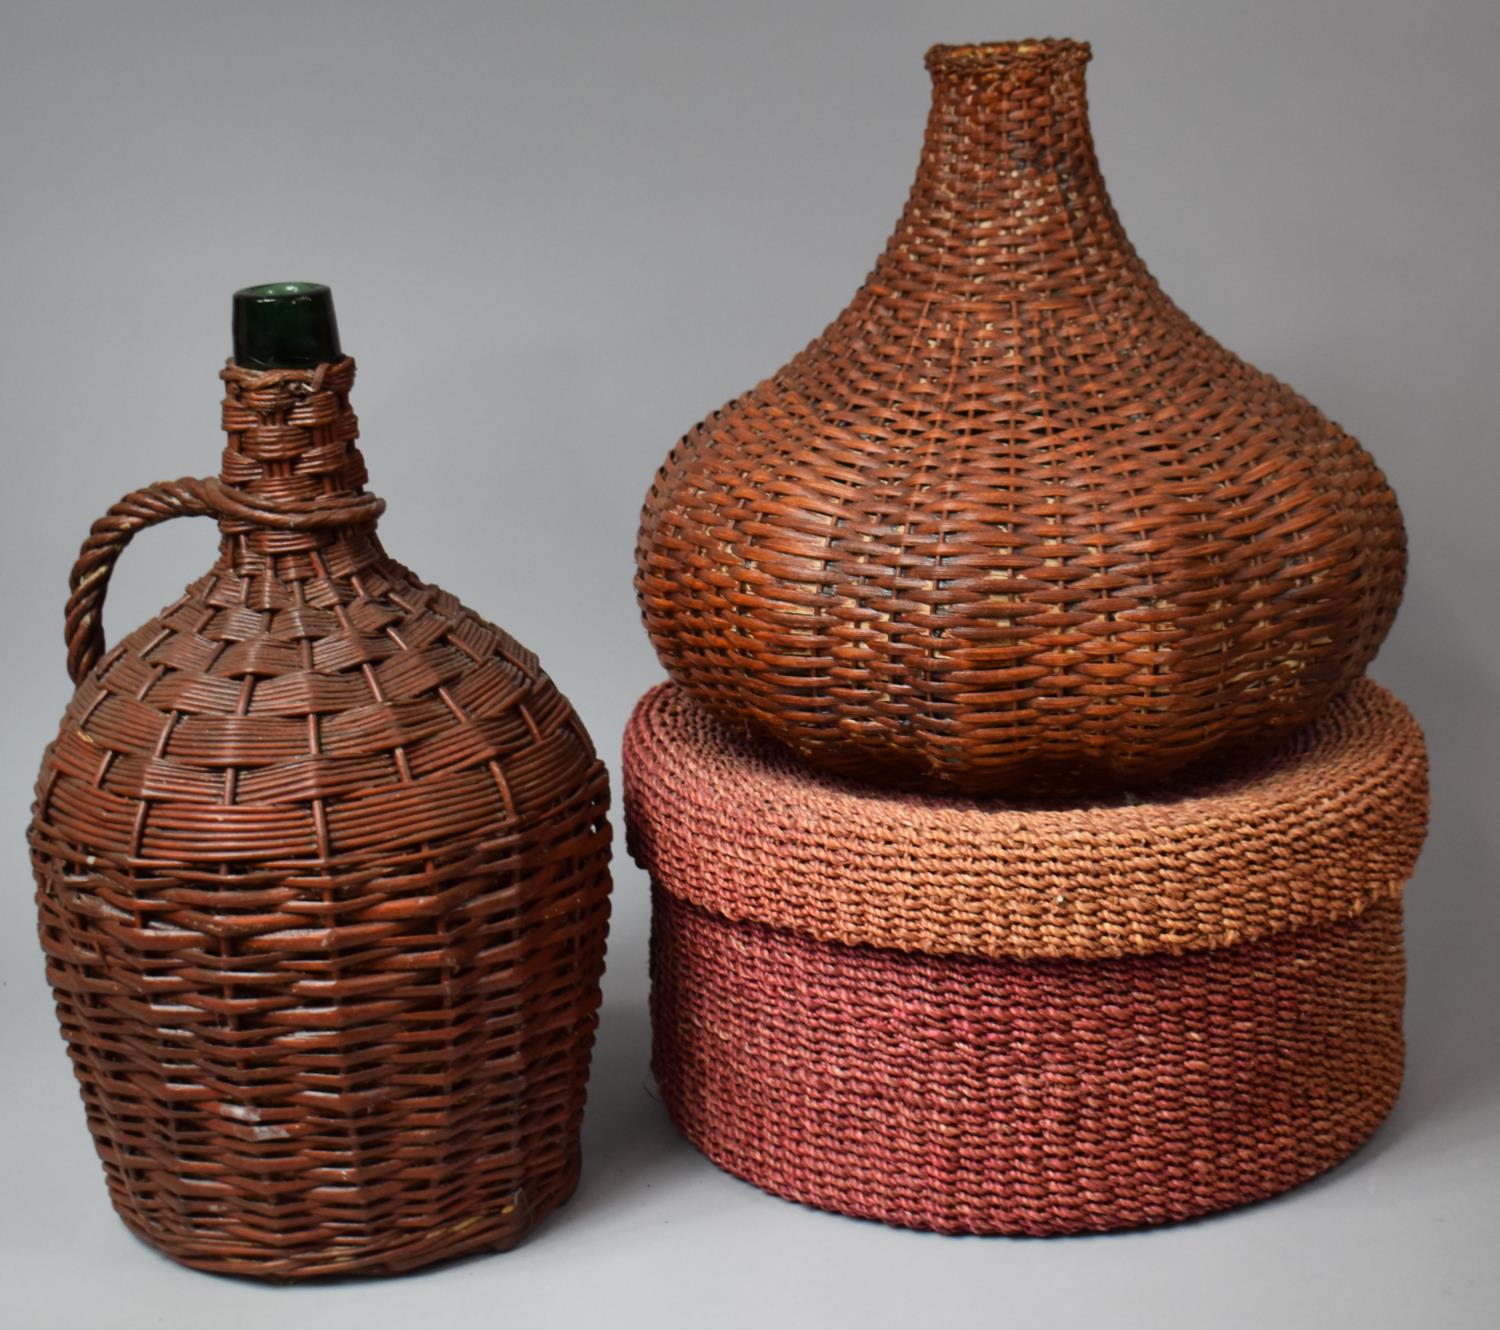 A Wicker Covered Glass Bottle, Wicker Lamp Shade and Cylindrical Box